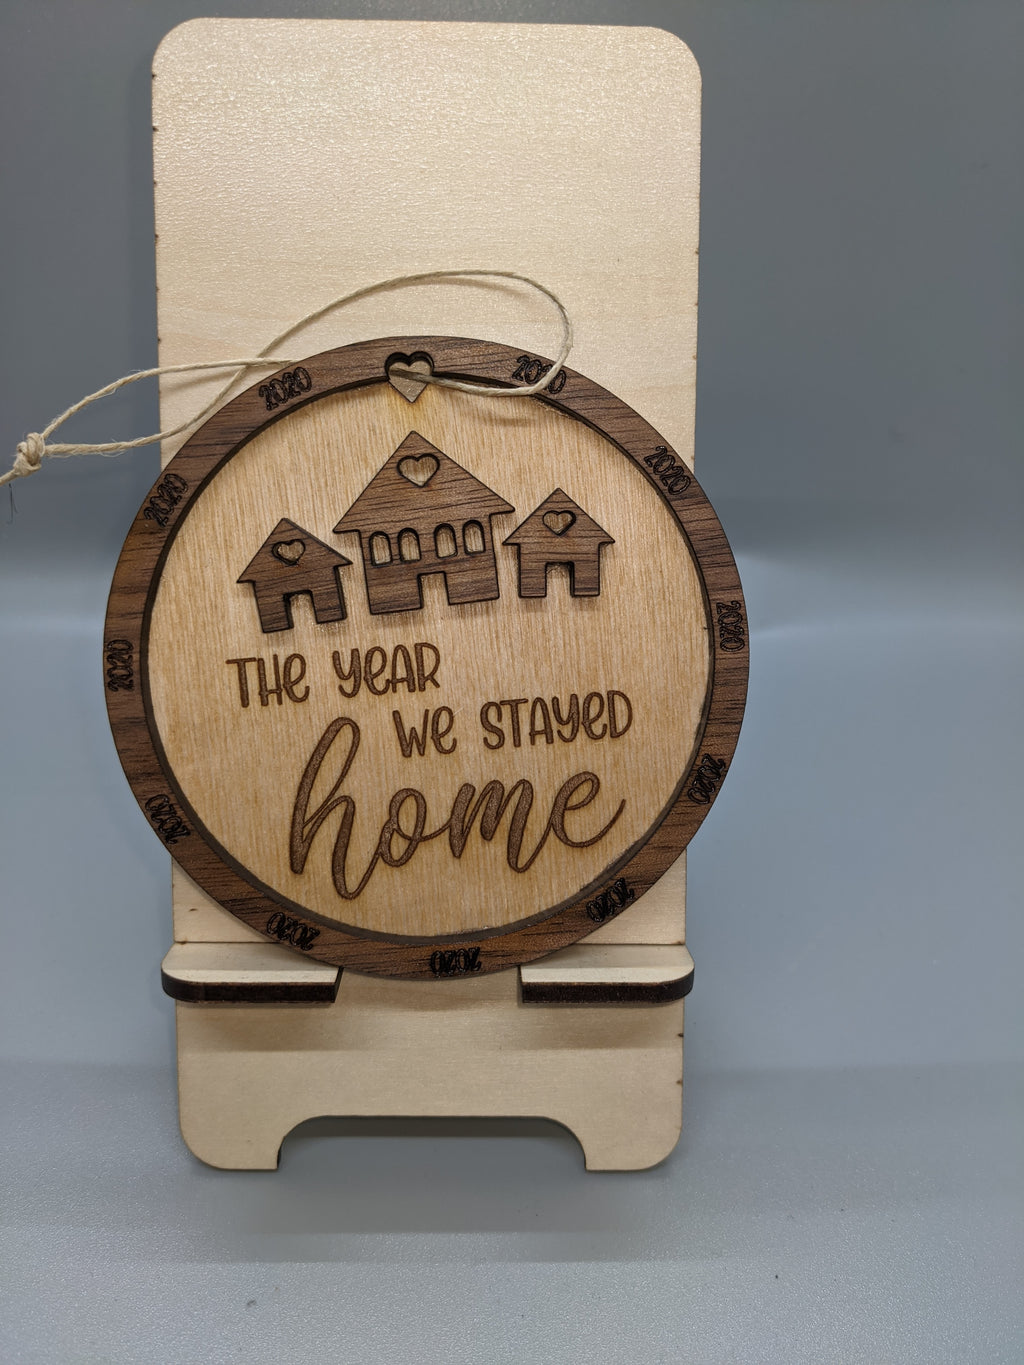 The year we stayed home Christmas ornament